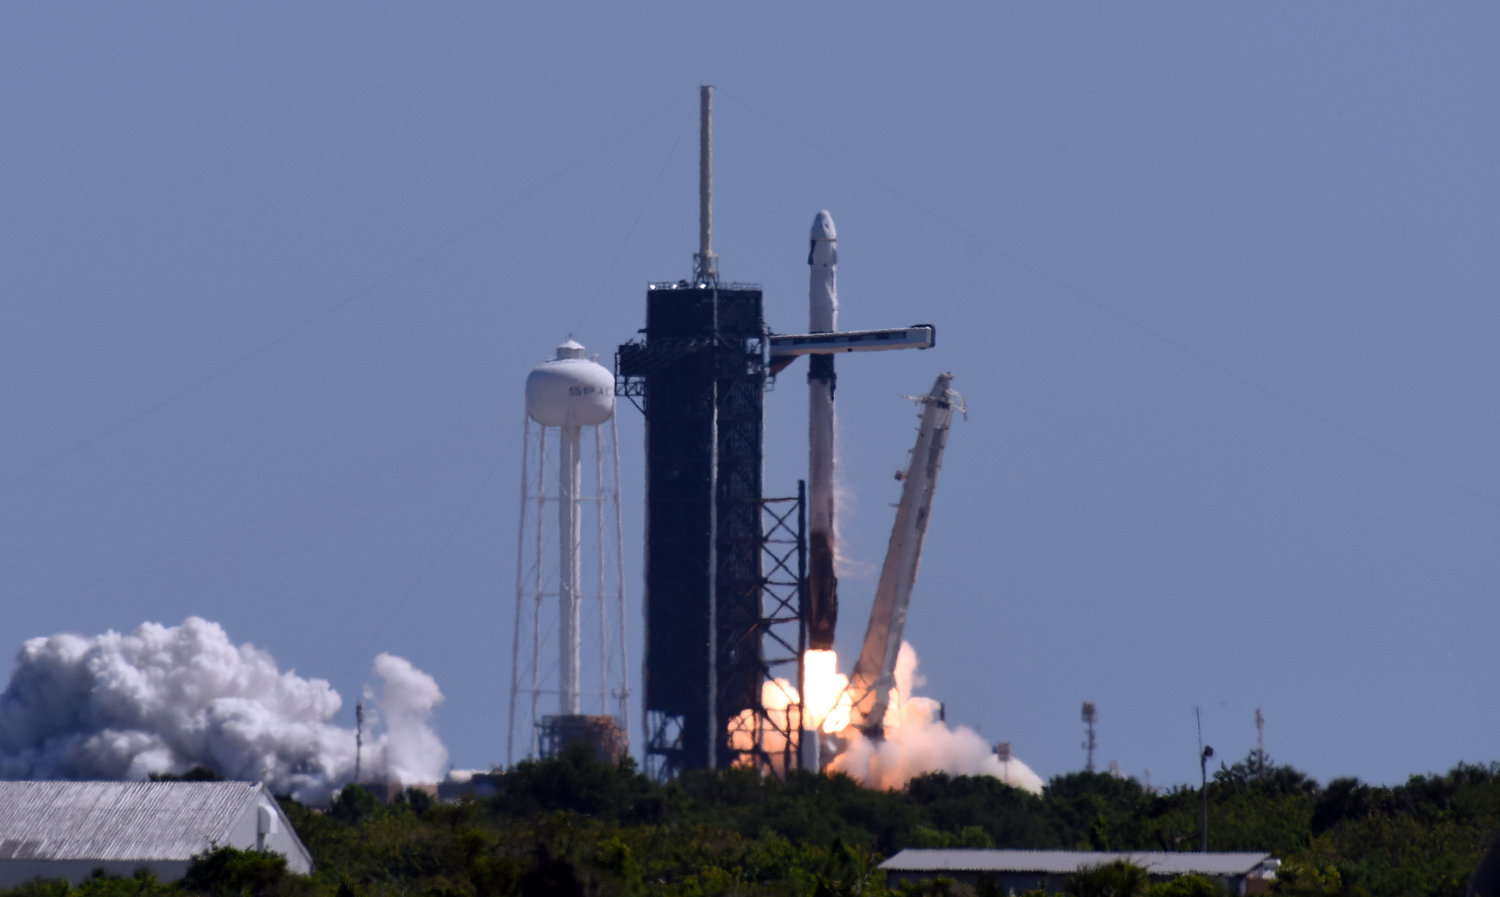 The SpaceX Falcon 9 rocket lifts off carrying the Crew Dragon spacecraft on a commercial mission managed by Axiom Space, at Kennedy Space Center, April 8, 2022, in Cape Canaveral, Florida. (Red Huber/Getty Images/TNS)